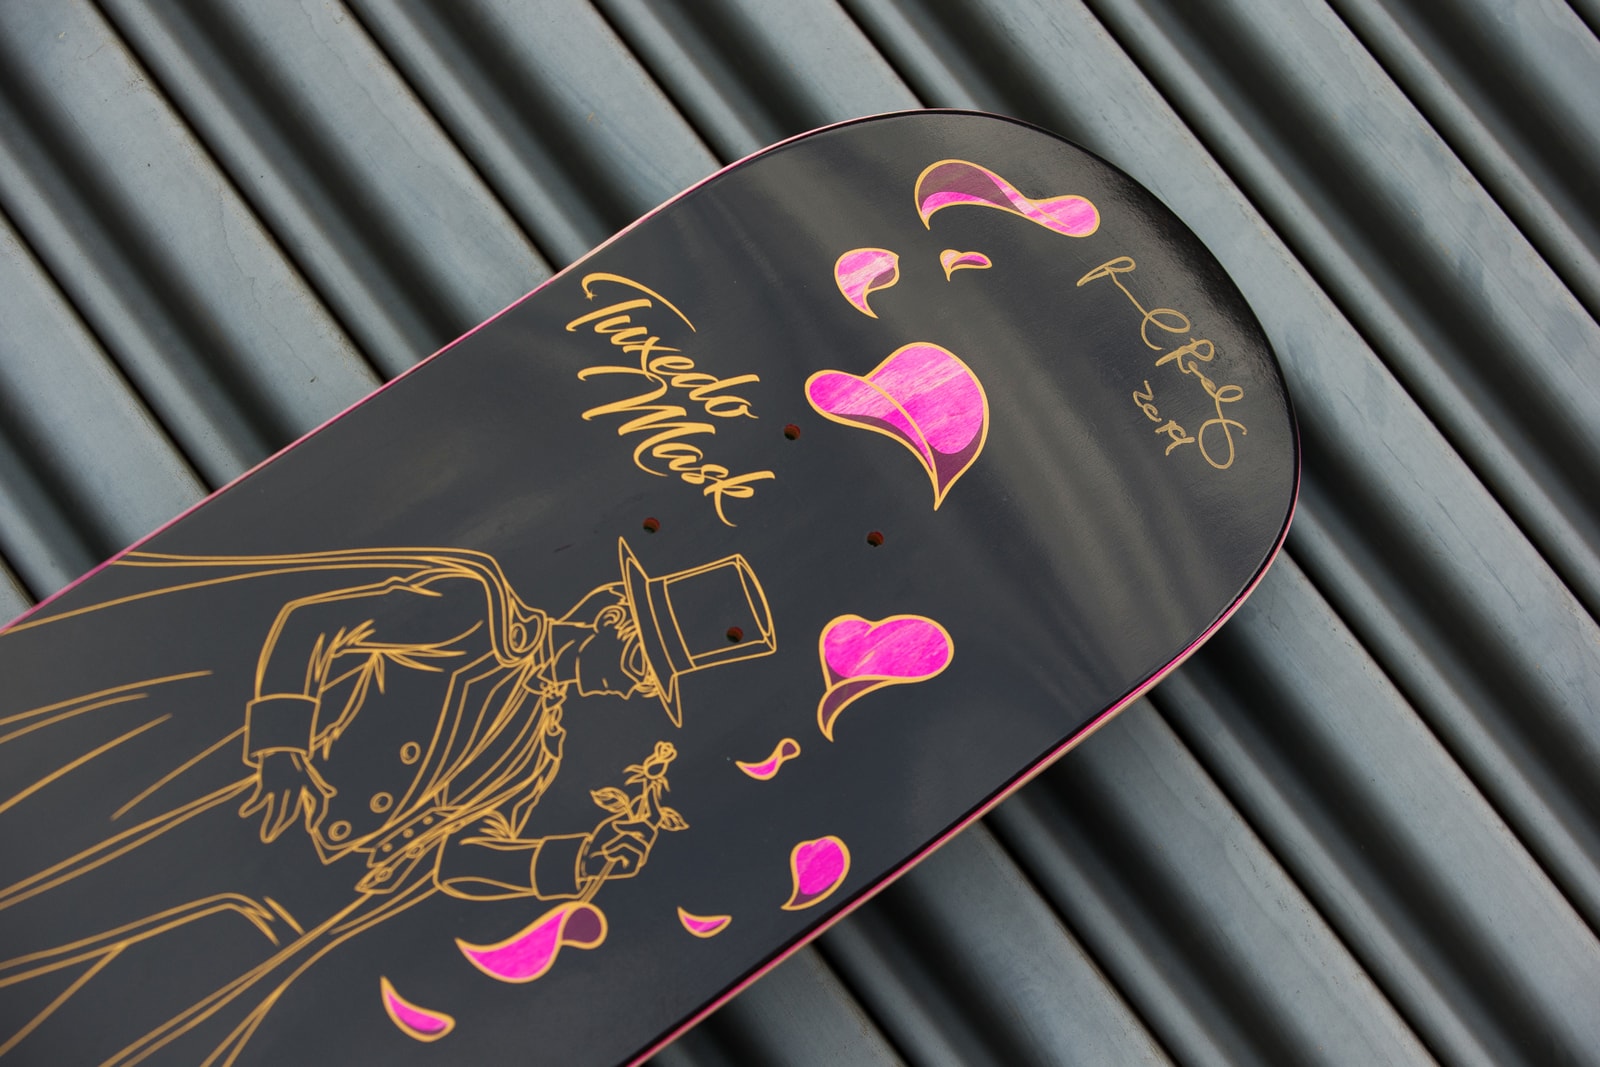 PAUL RODRIGUEZ A-PRO-CIATION DAY: SIGNED PRIMITIVE DECKS IN THE CANTEEN!